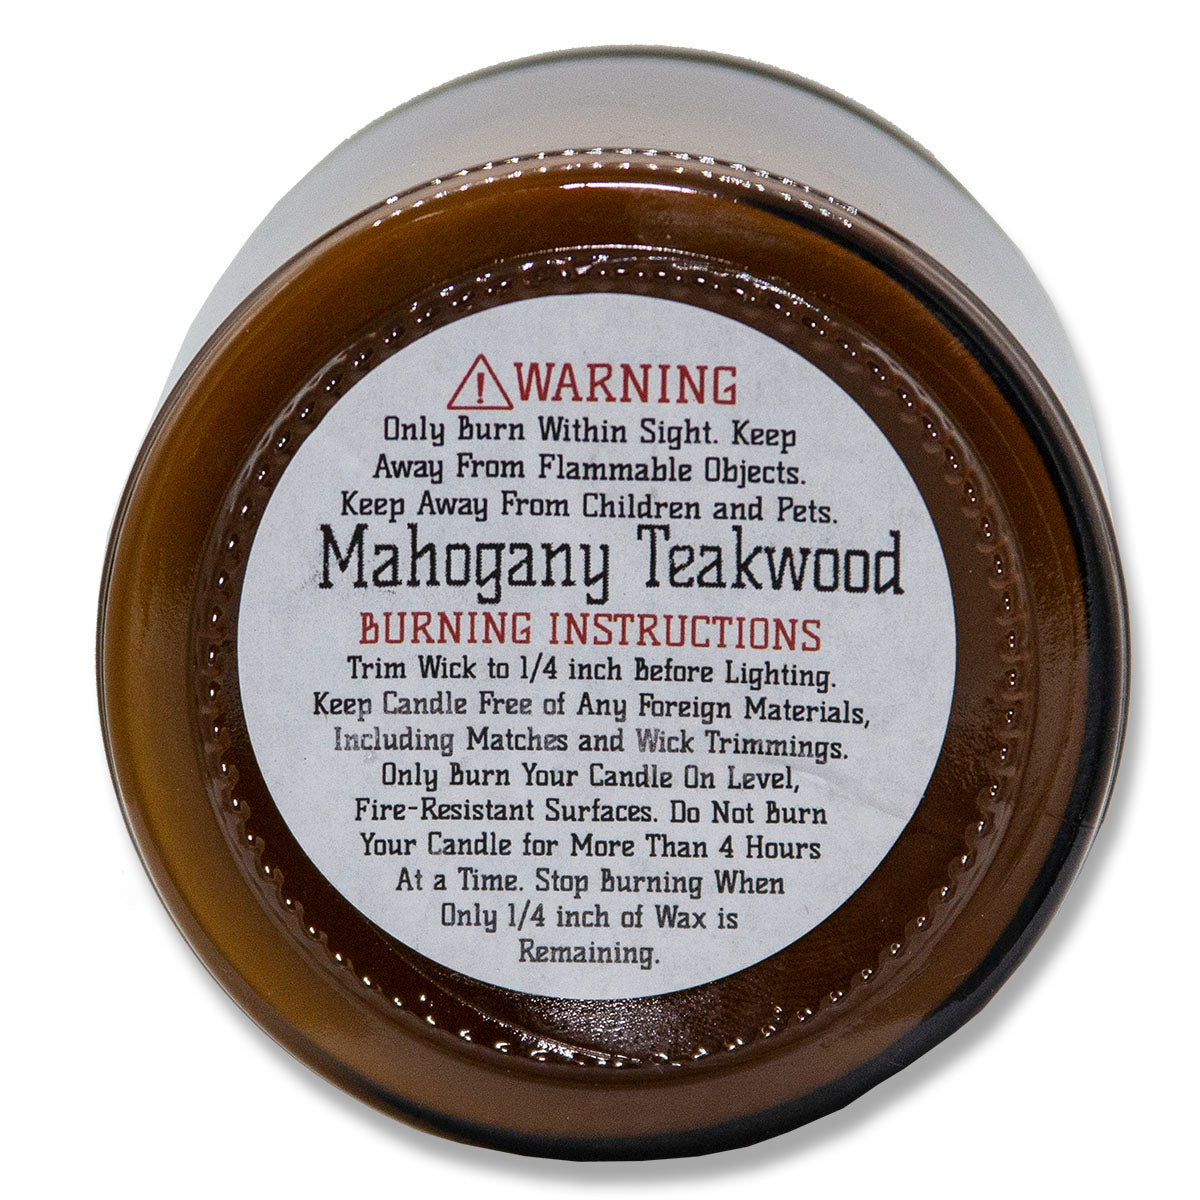 Mahogany Teakwood, Lone Star Candles & More's Premium Hand Poured Strongly Scented Soy Wax Gift Candle, A Rich Blend of Fine Woods and Florals, USA Made in Texas, Amber Glass Jar 9oz Best Mom